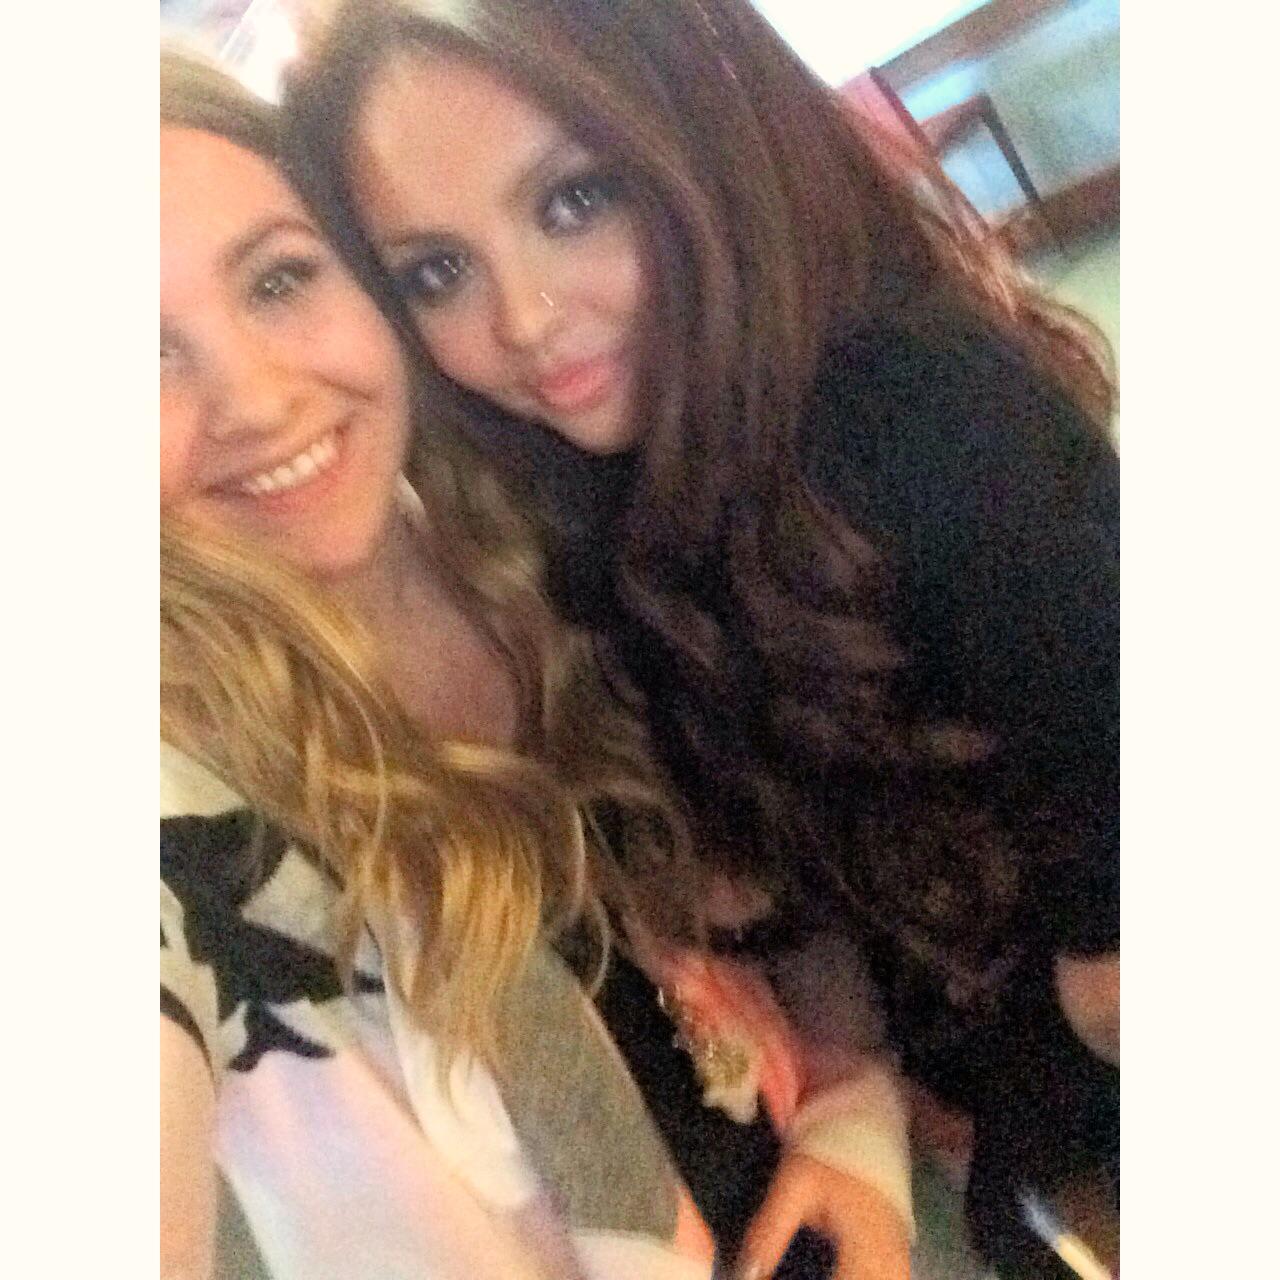 Happy birthday to jesy nelson     i hope you have the best day ever. miss you lots! 